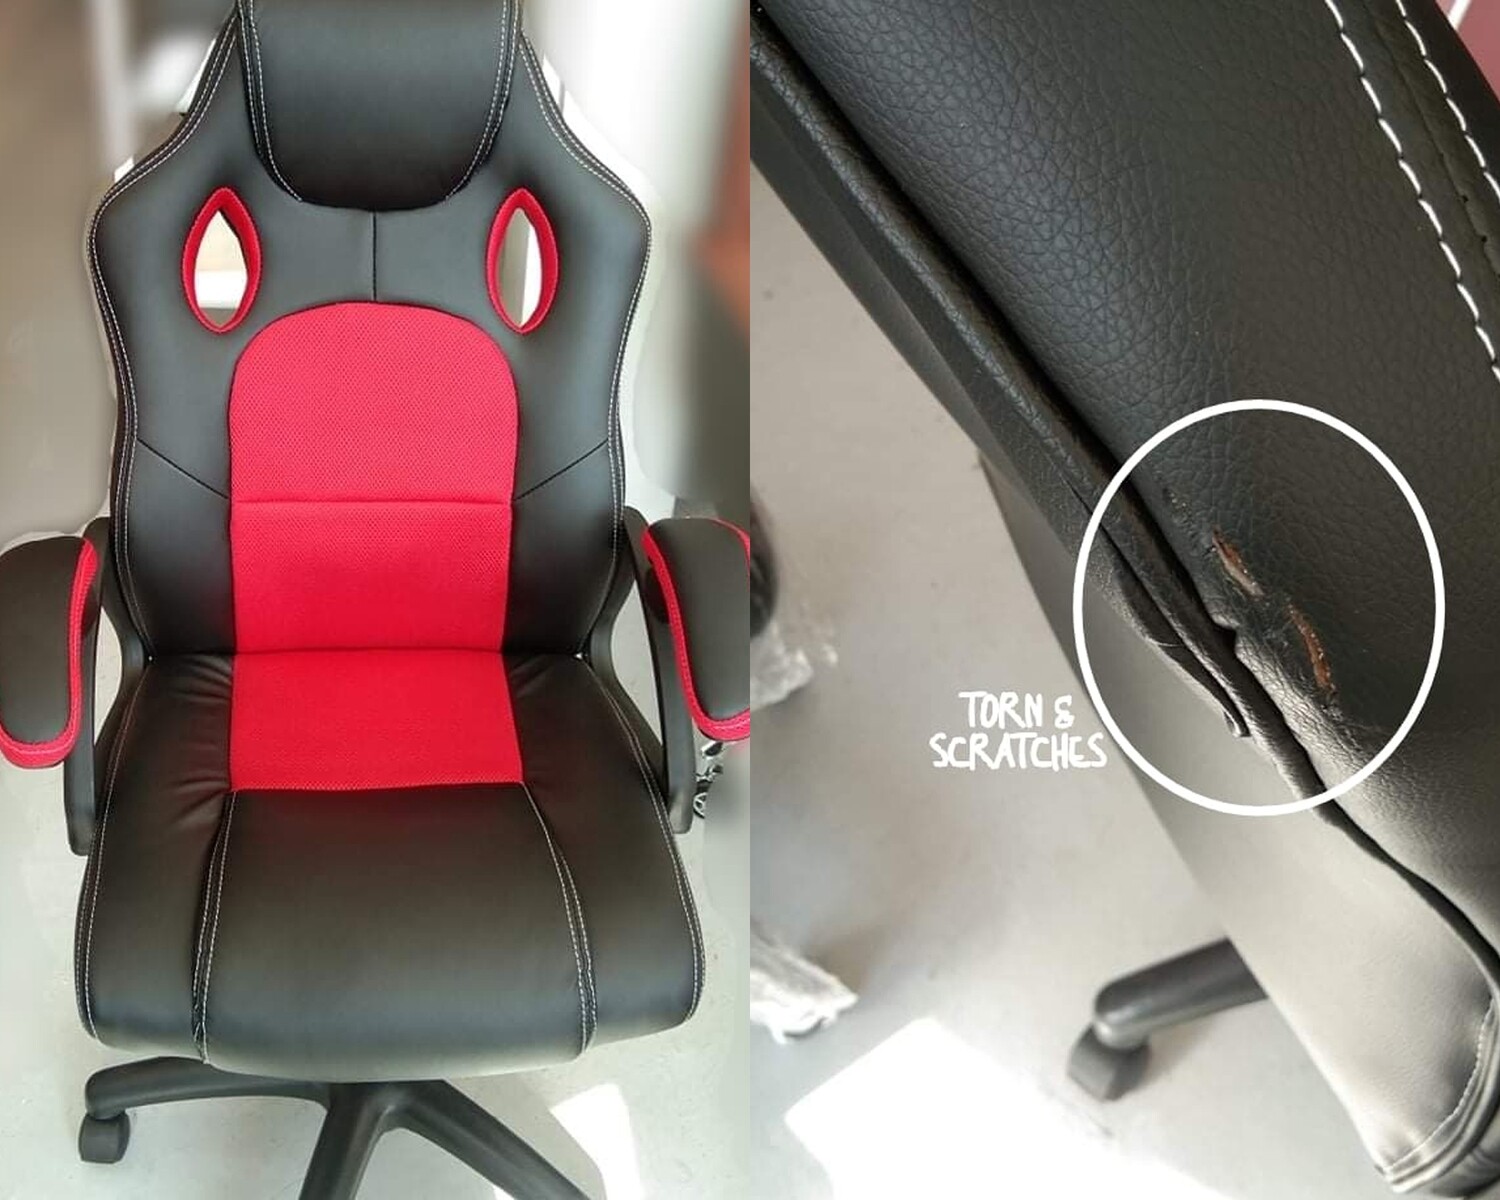 (Sale) OFX Reeva PU Gaming Chair (Black+Red) (Backrest Leather Torn & Scratches) (Sratches & Torn) (Black+White-Torn) (All Black-Torn)